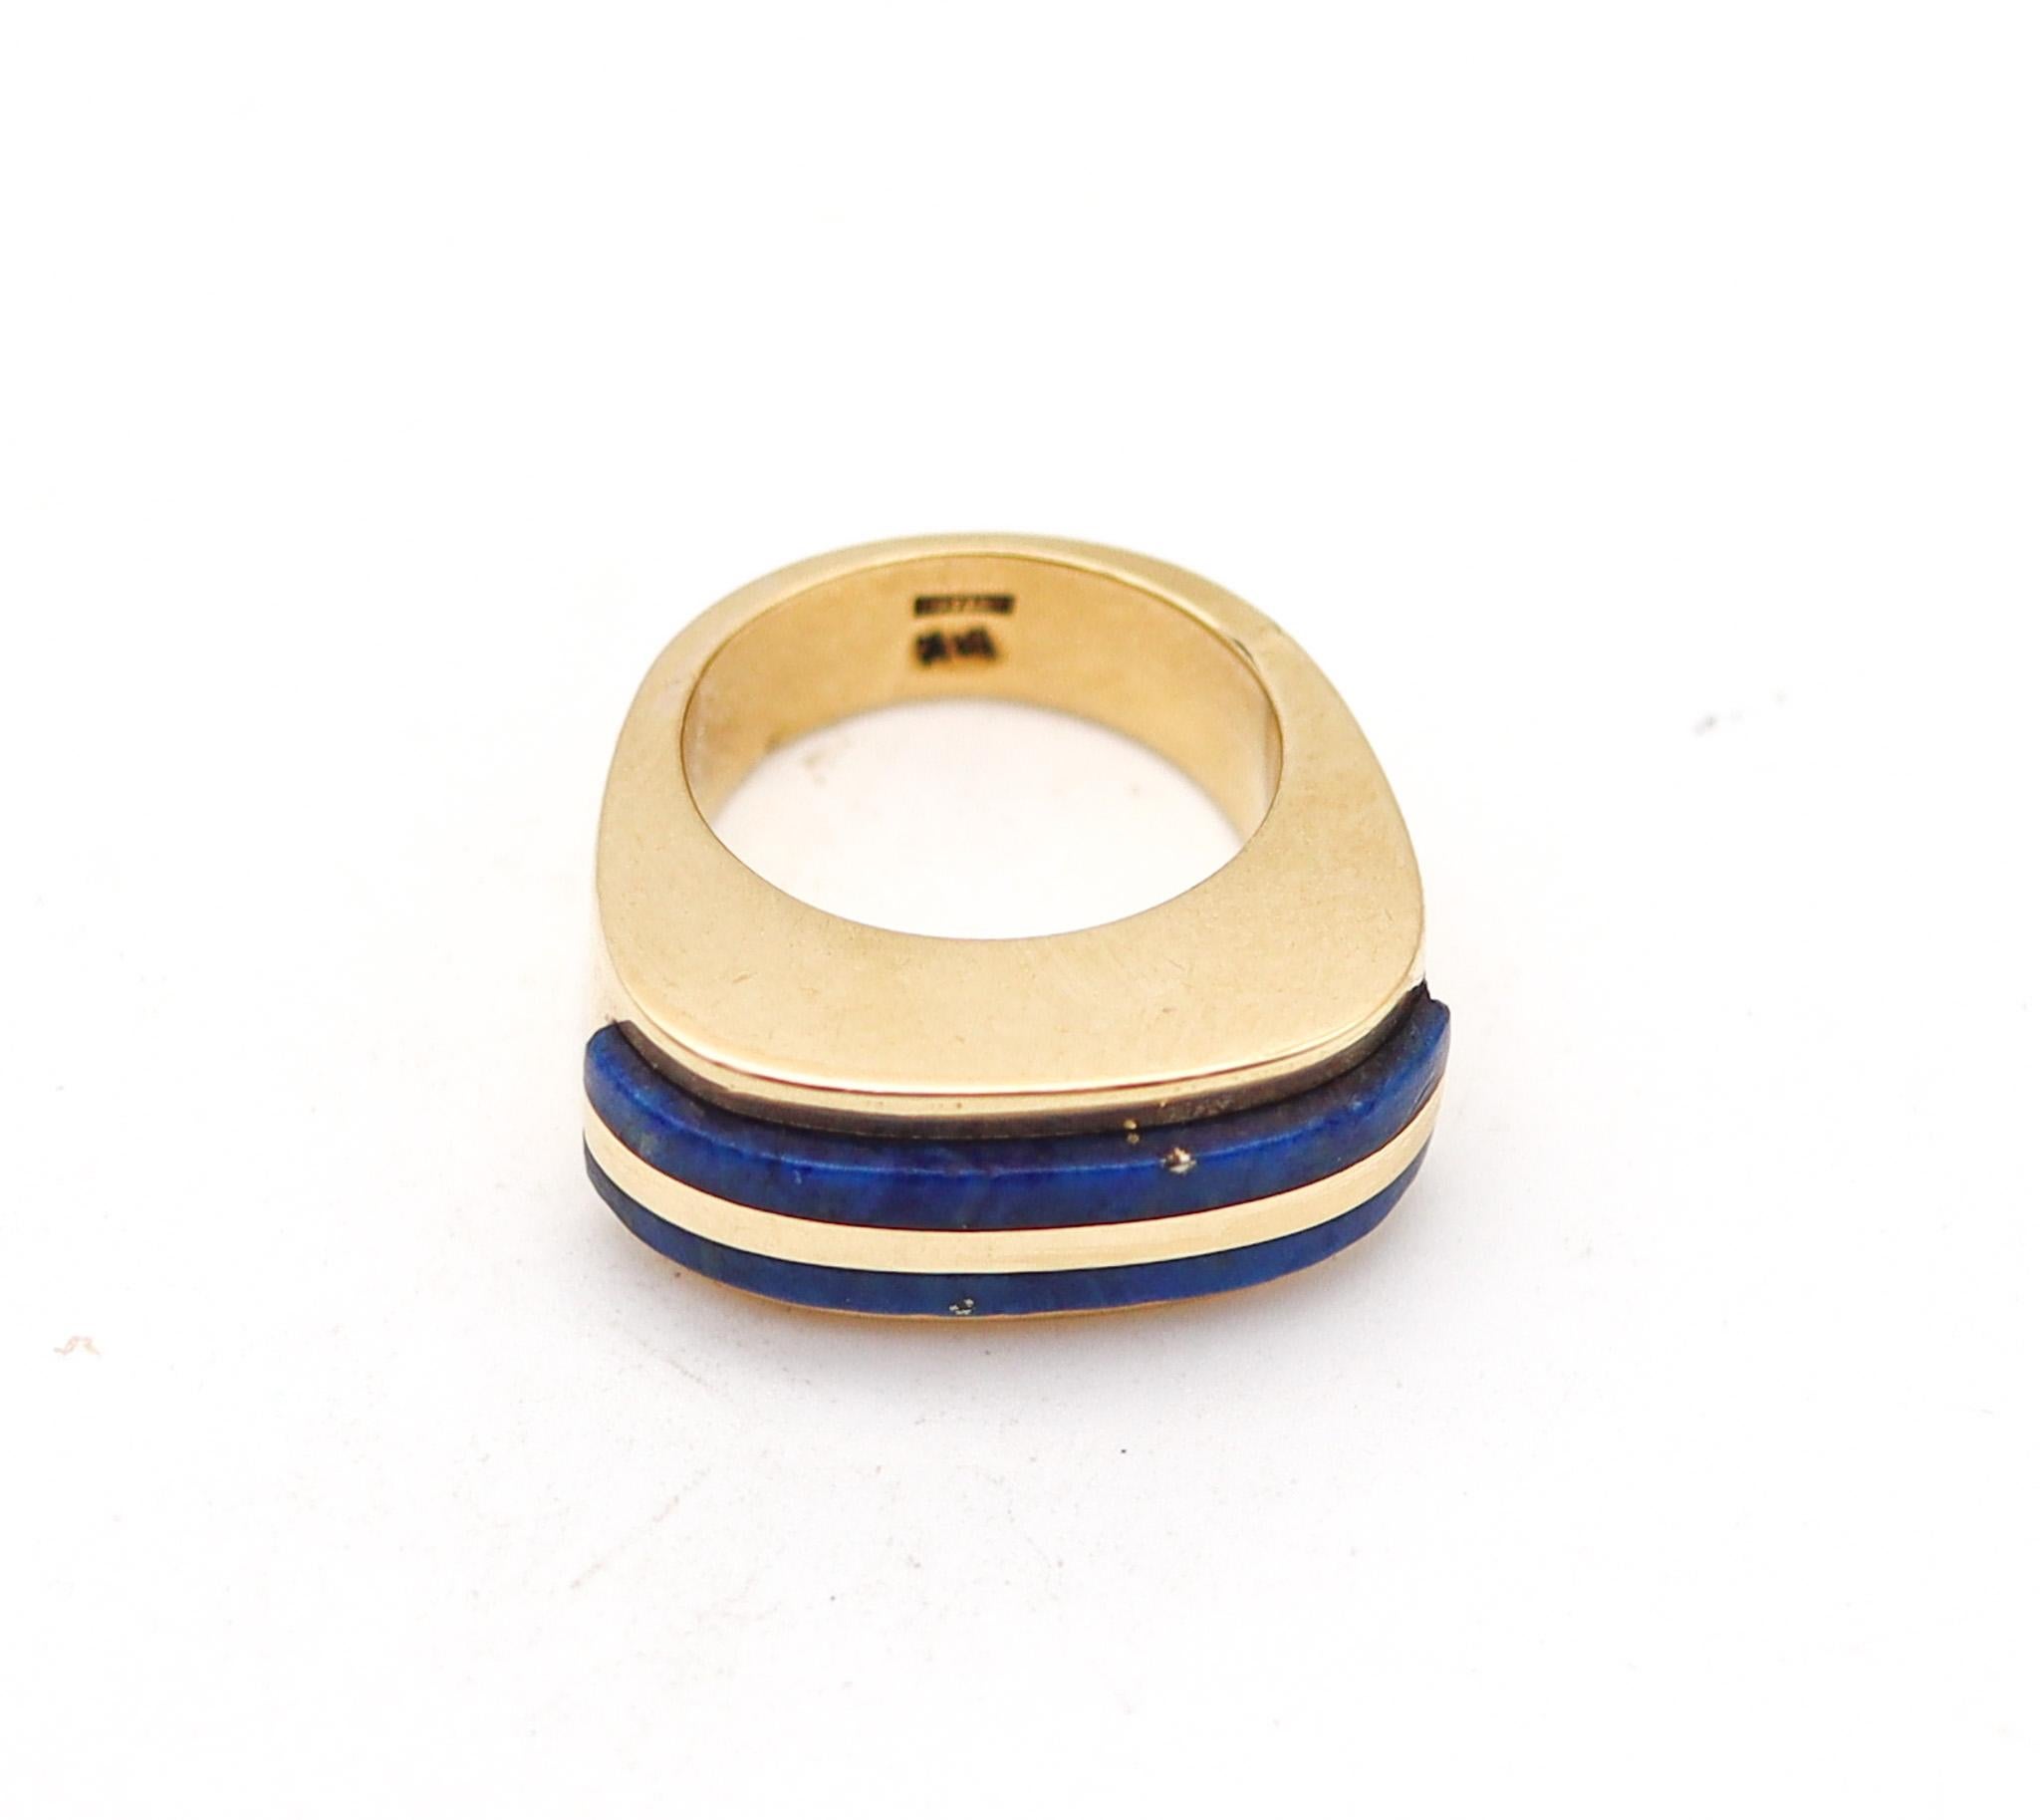 Modernist Tiffany & Co. 1970 Donald Claflin Ring In 18Kt Yellow Gold With Lapis Lazuli